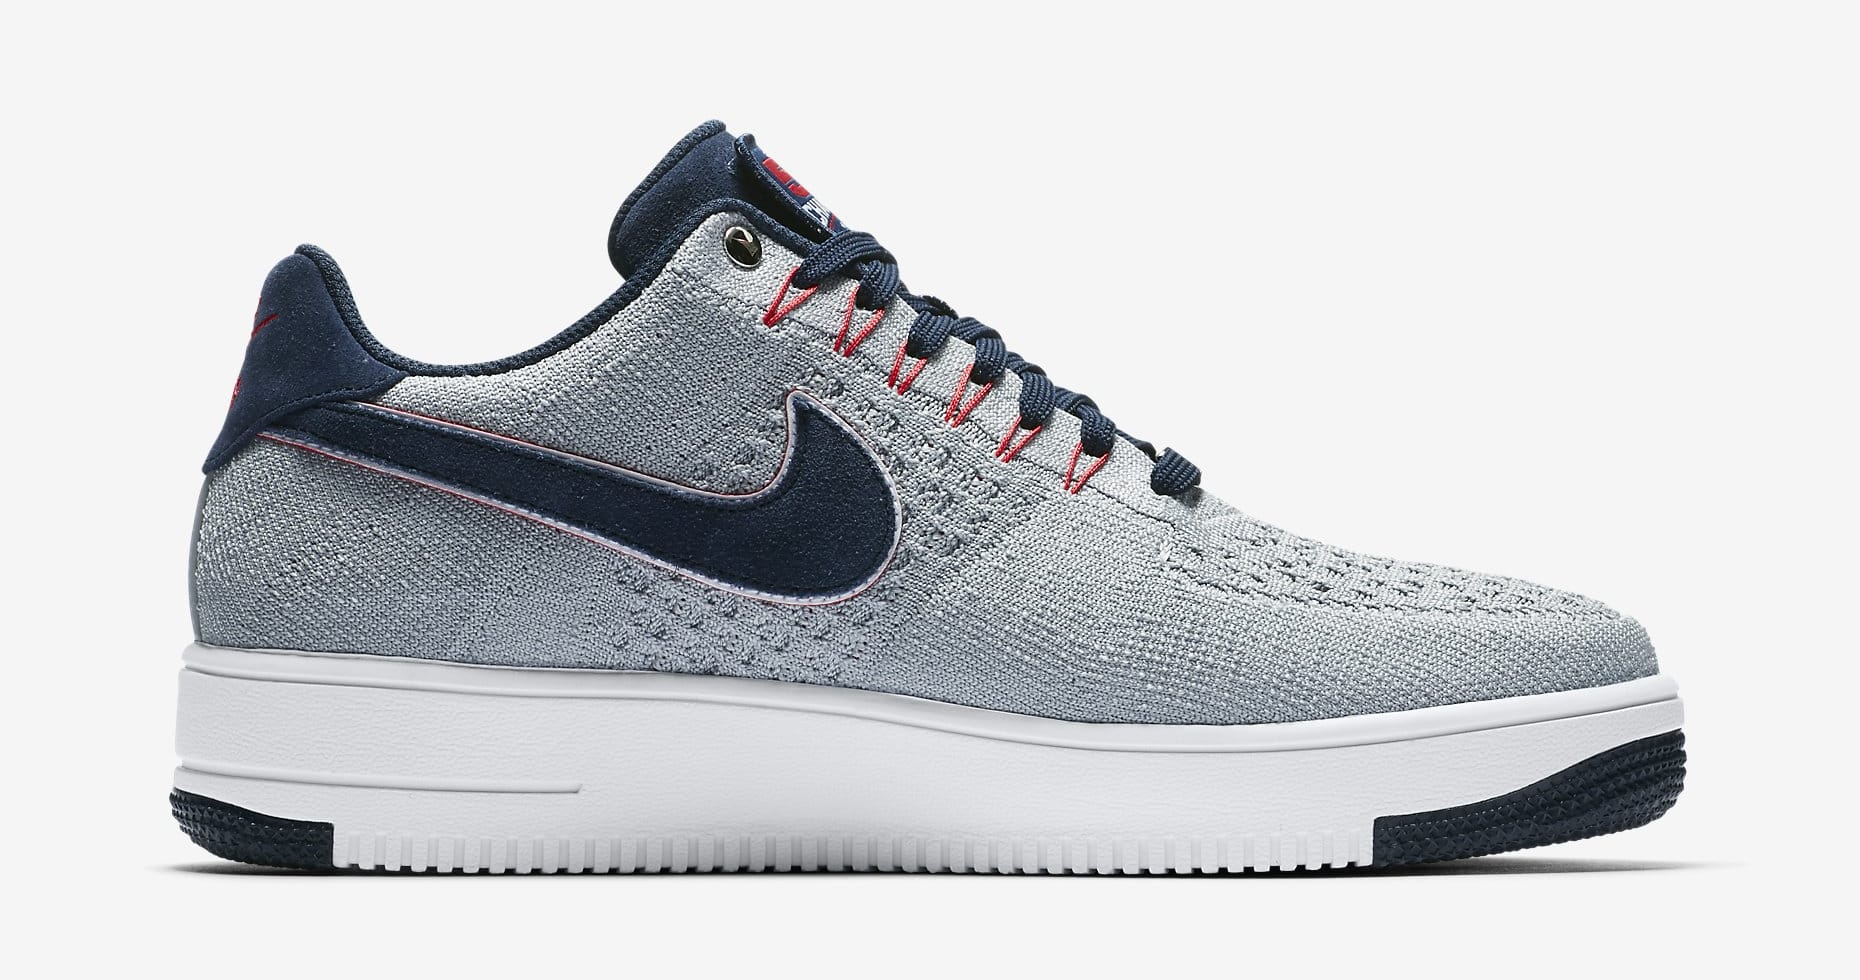 The Patriots Get Their Very Own Colorway of the Air Force 1 Ultra Flyknit  Low - WearTesters